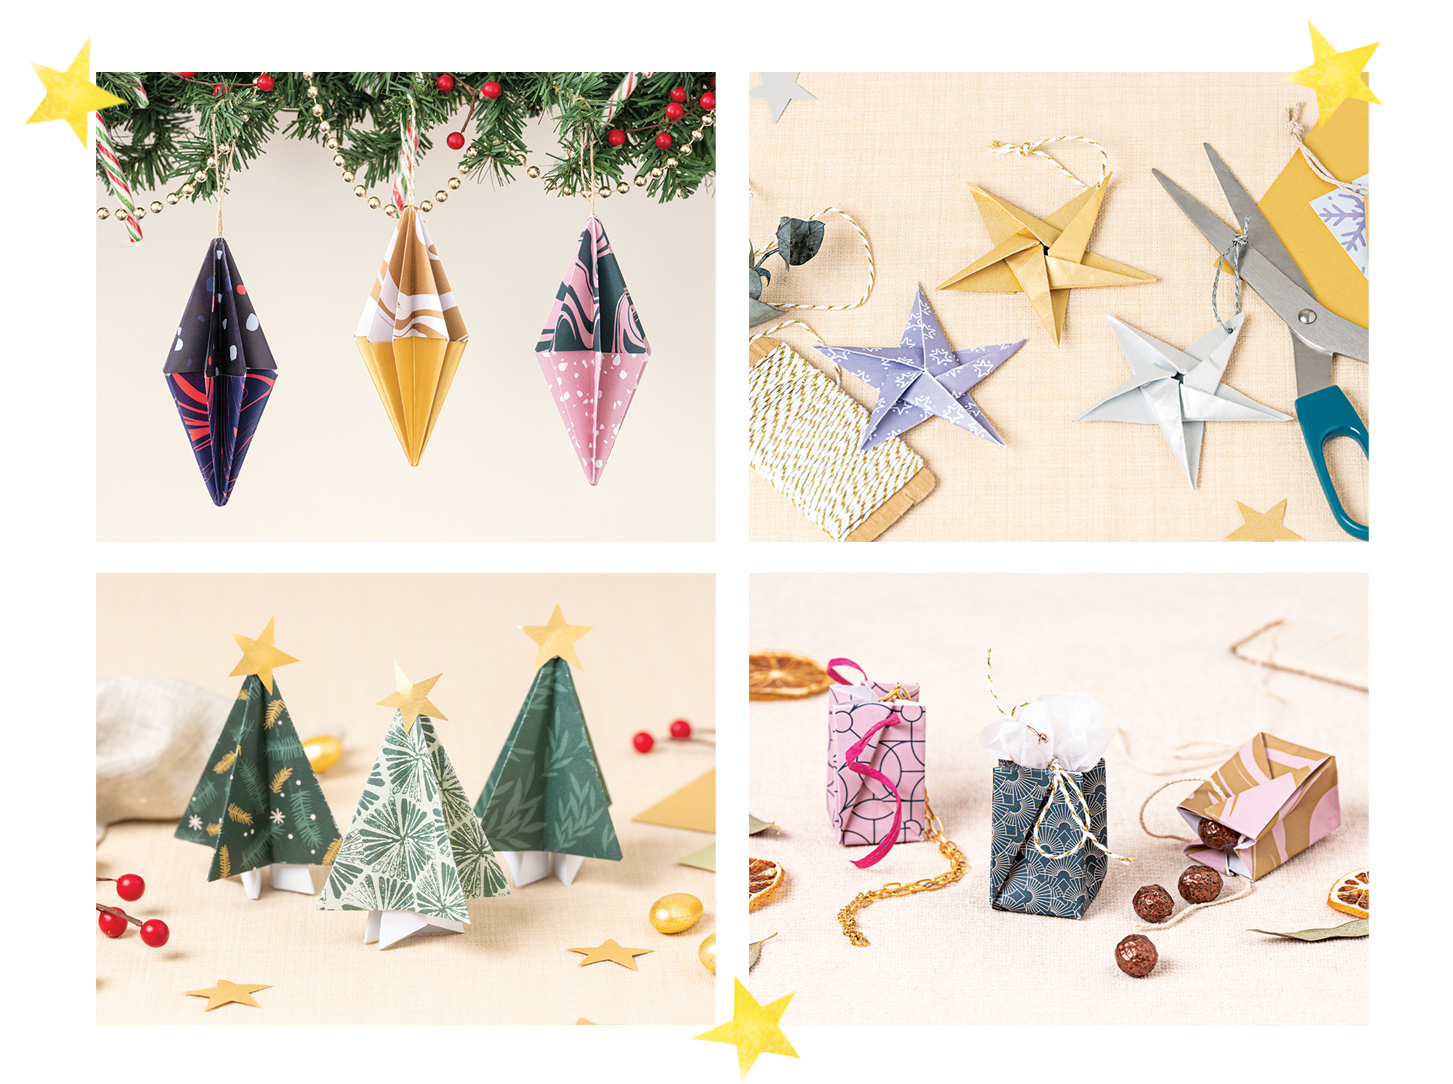 Diamond baubles, stars, christmas trees and presents origami with yellow star decorations